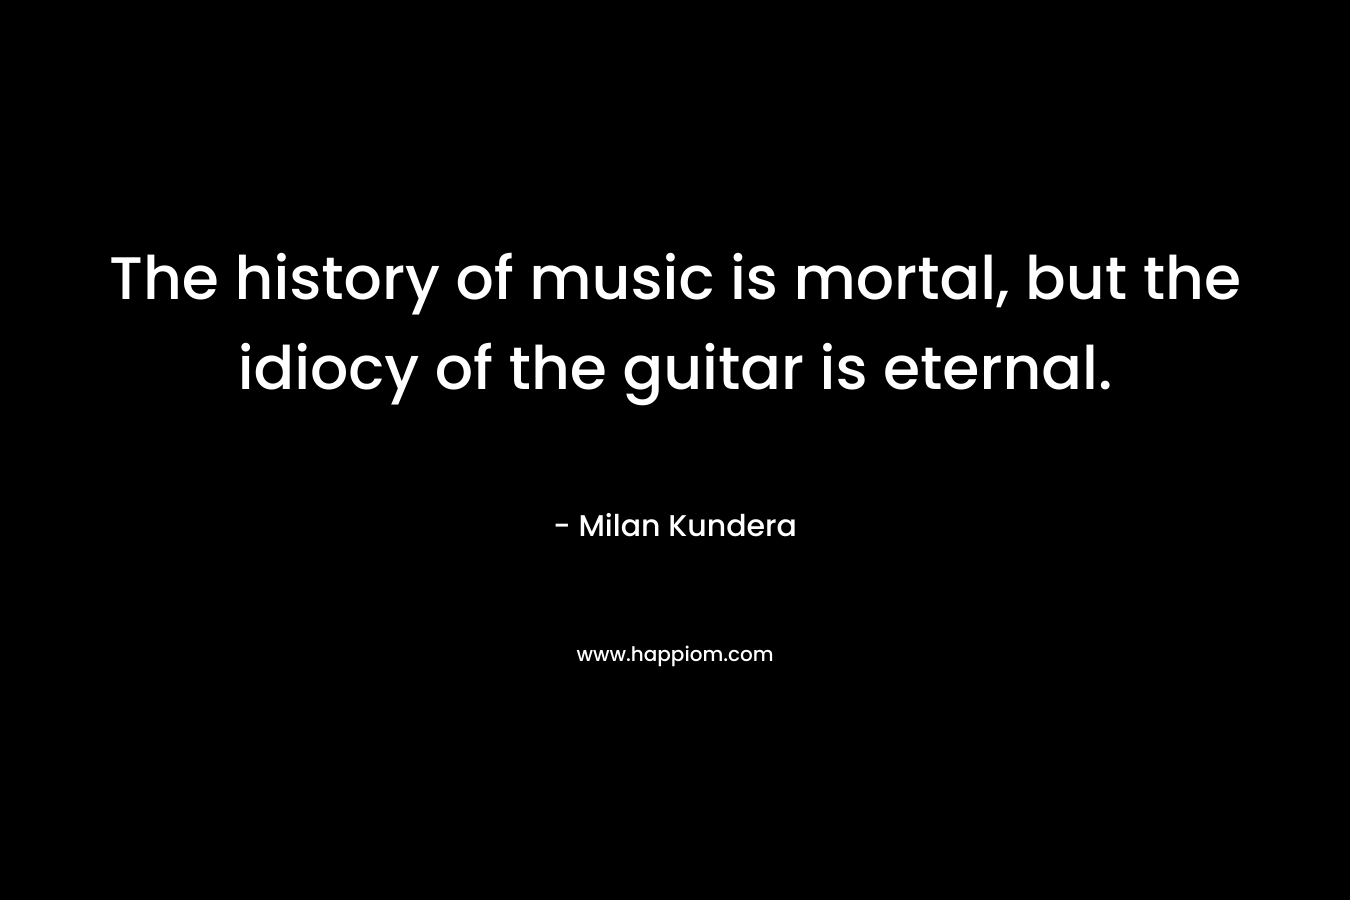 The history of music is mortal, but the idiocy of the guitar is eternal. – Milan Kundera